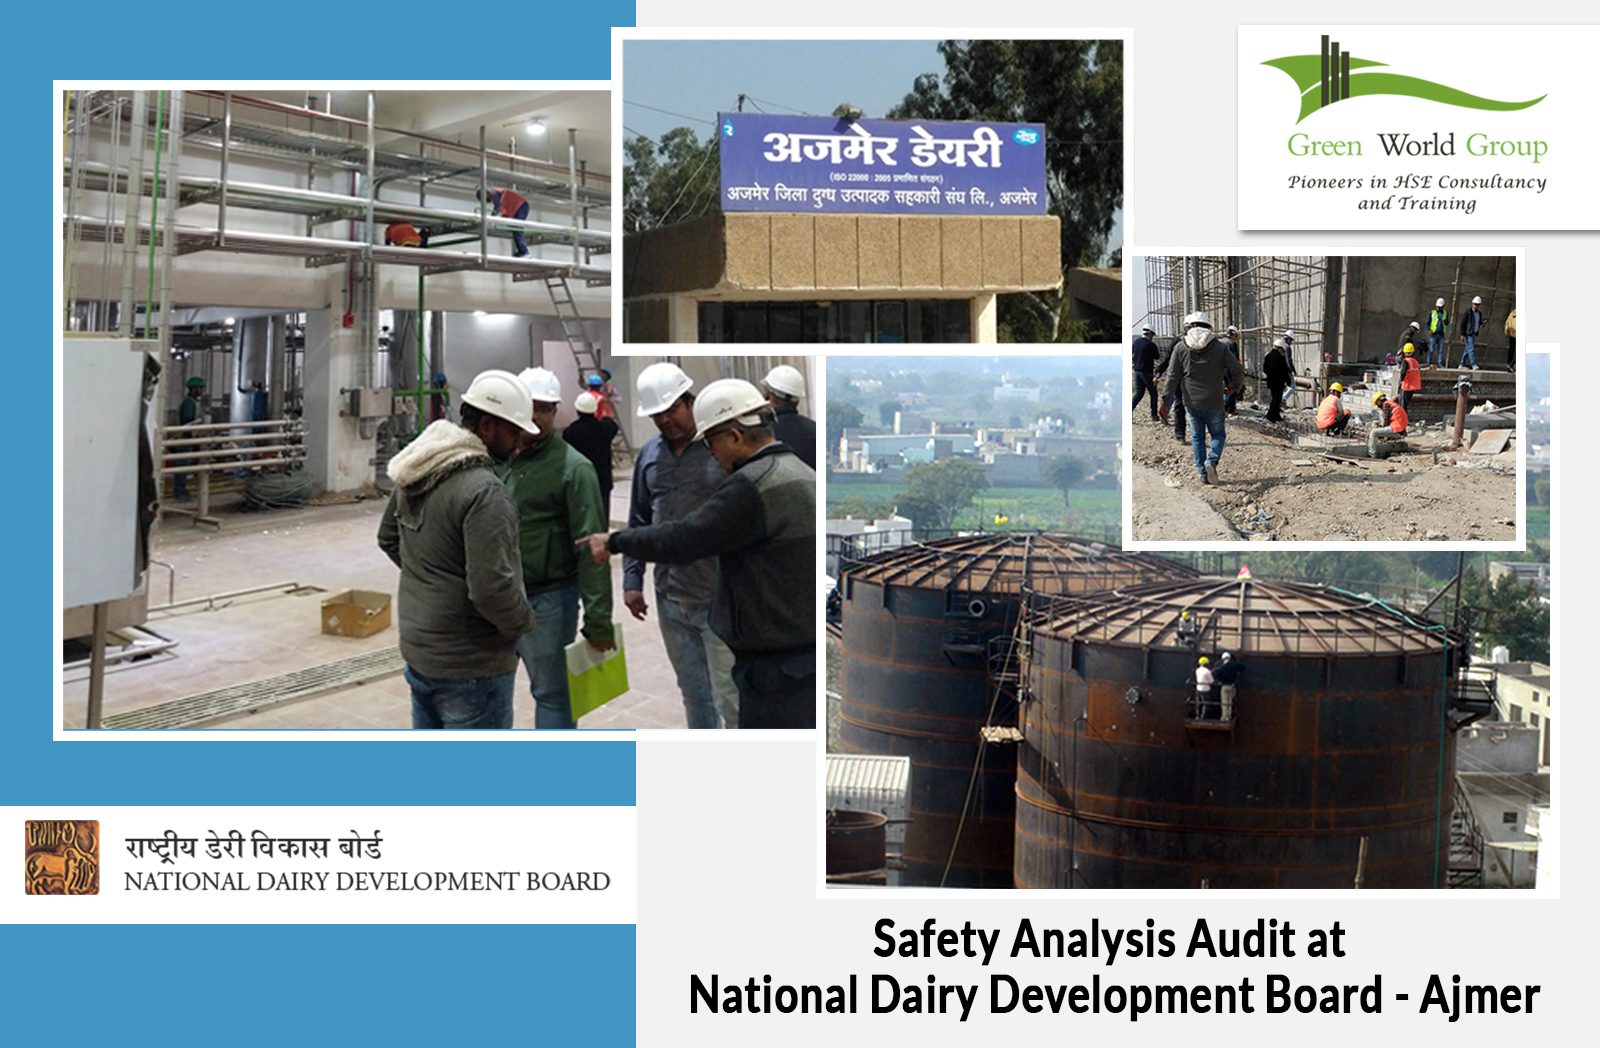 Safety Analysis Audit at National Dairy Development Board - Ajmer